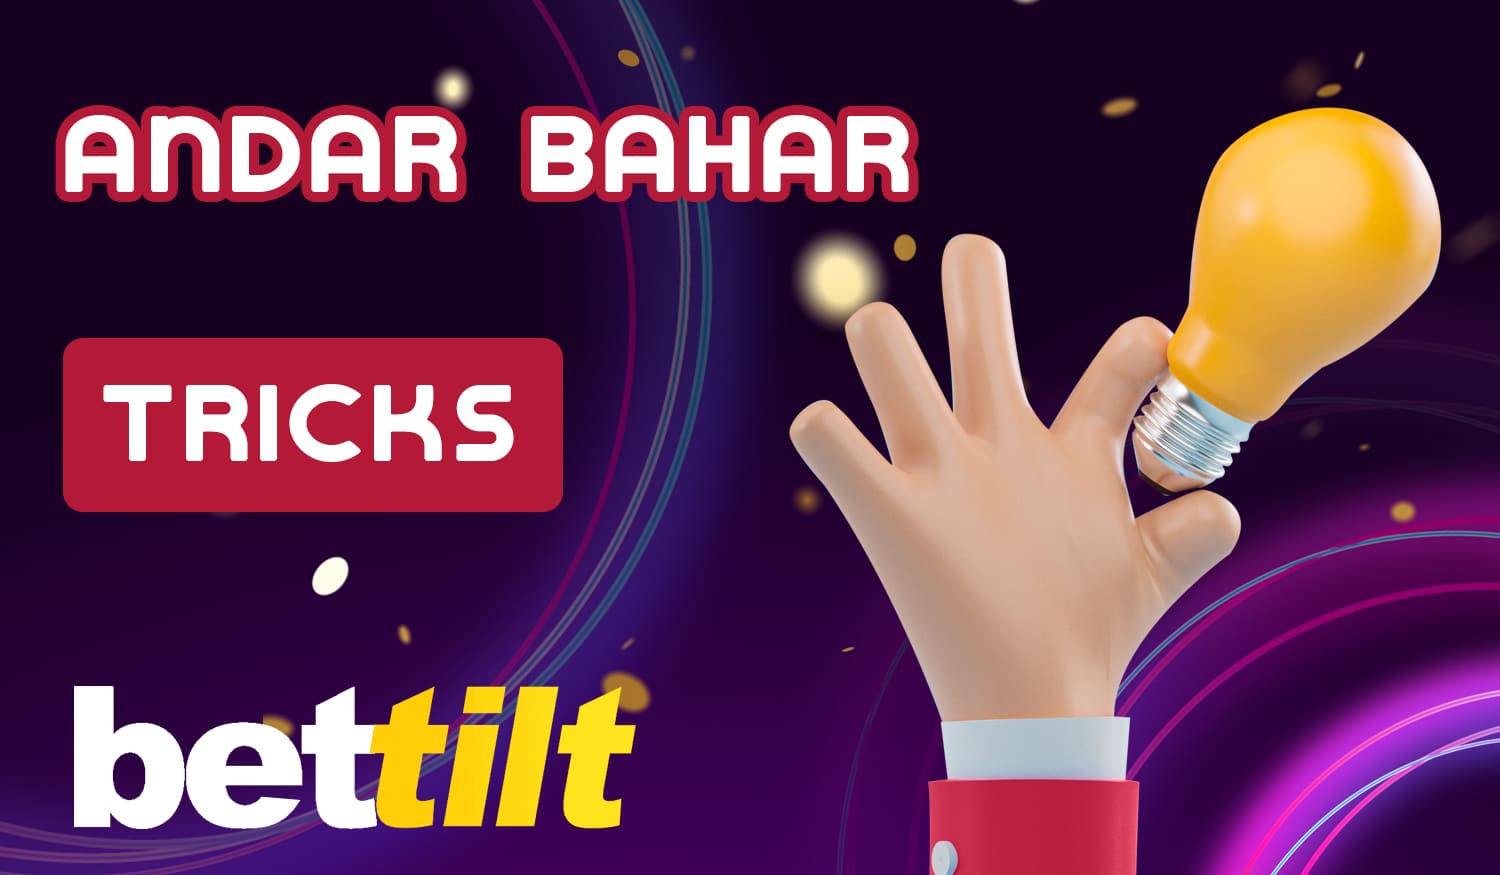 Useful tips and tricks that can be applied when playing Andar Bahar on Bettilt